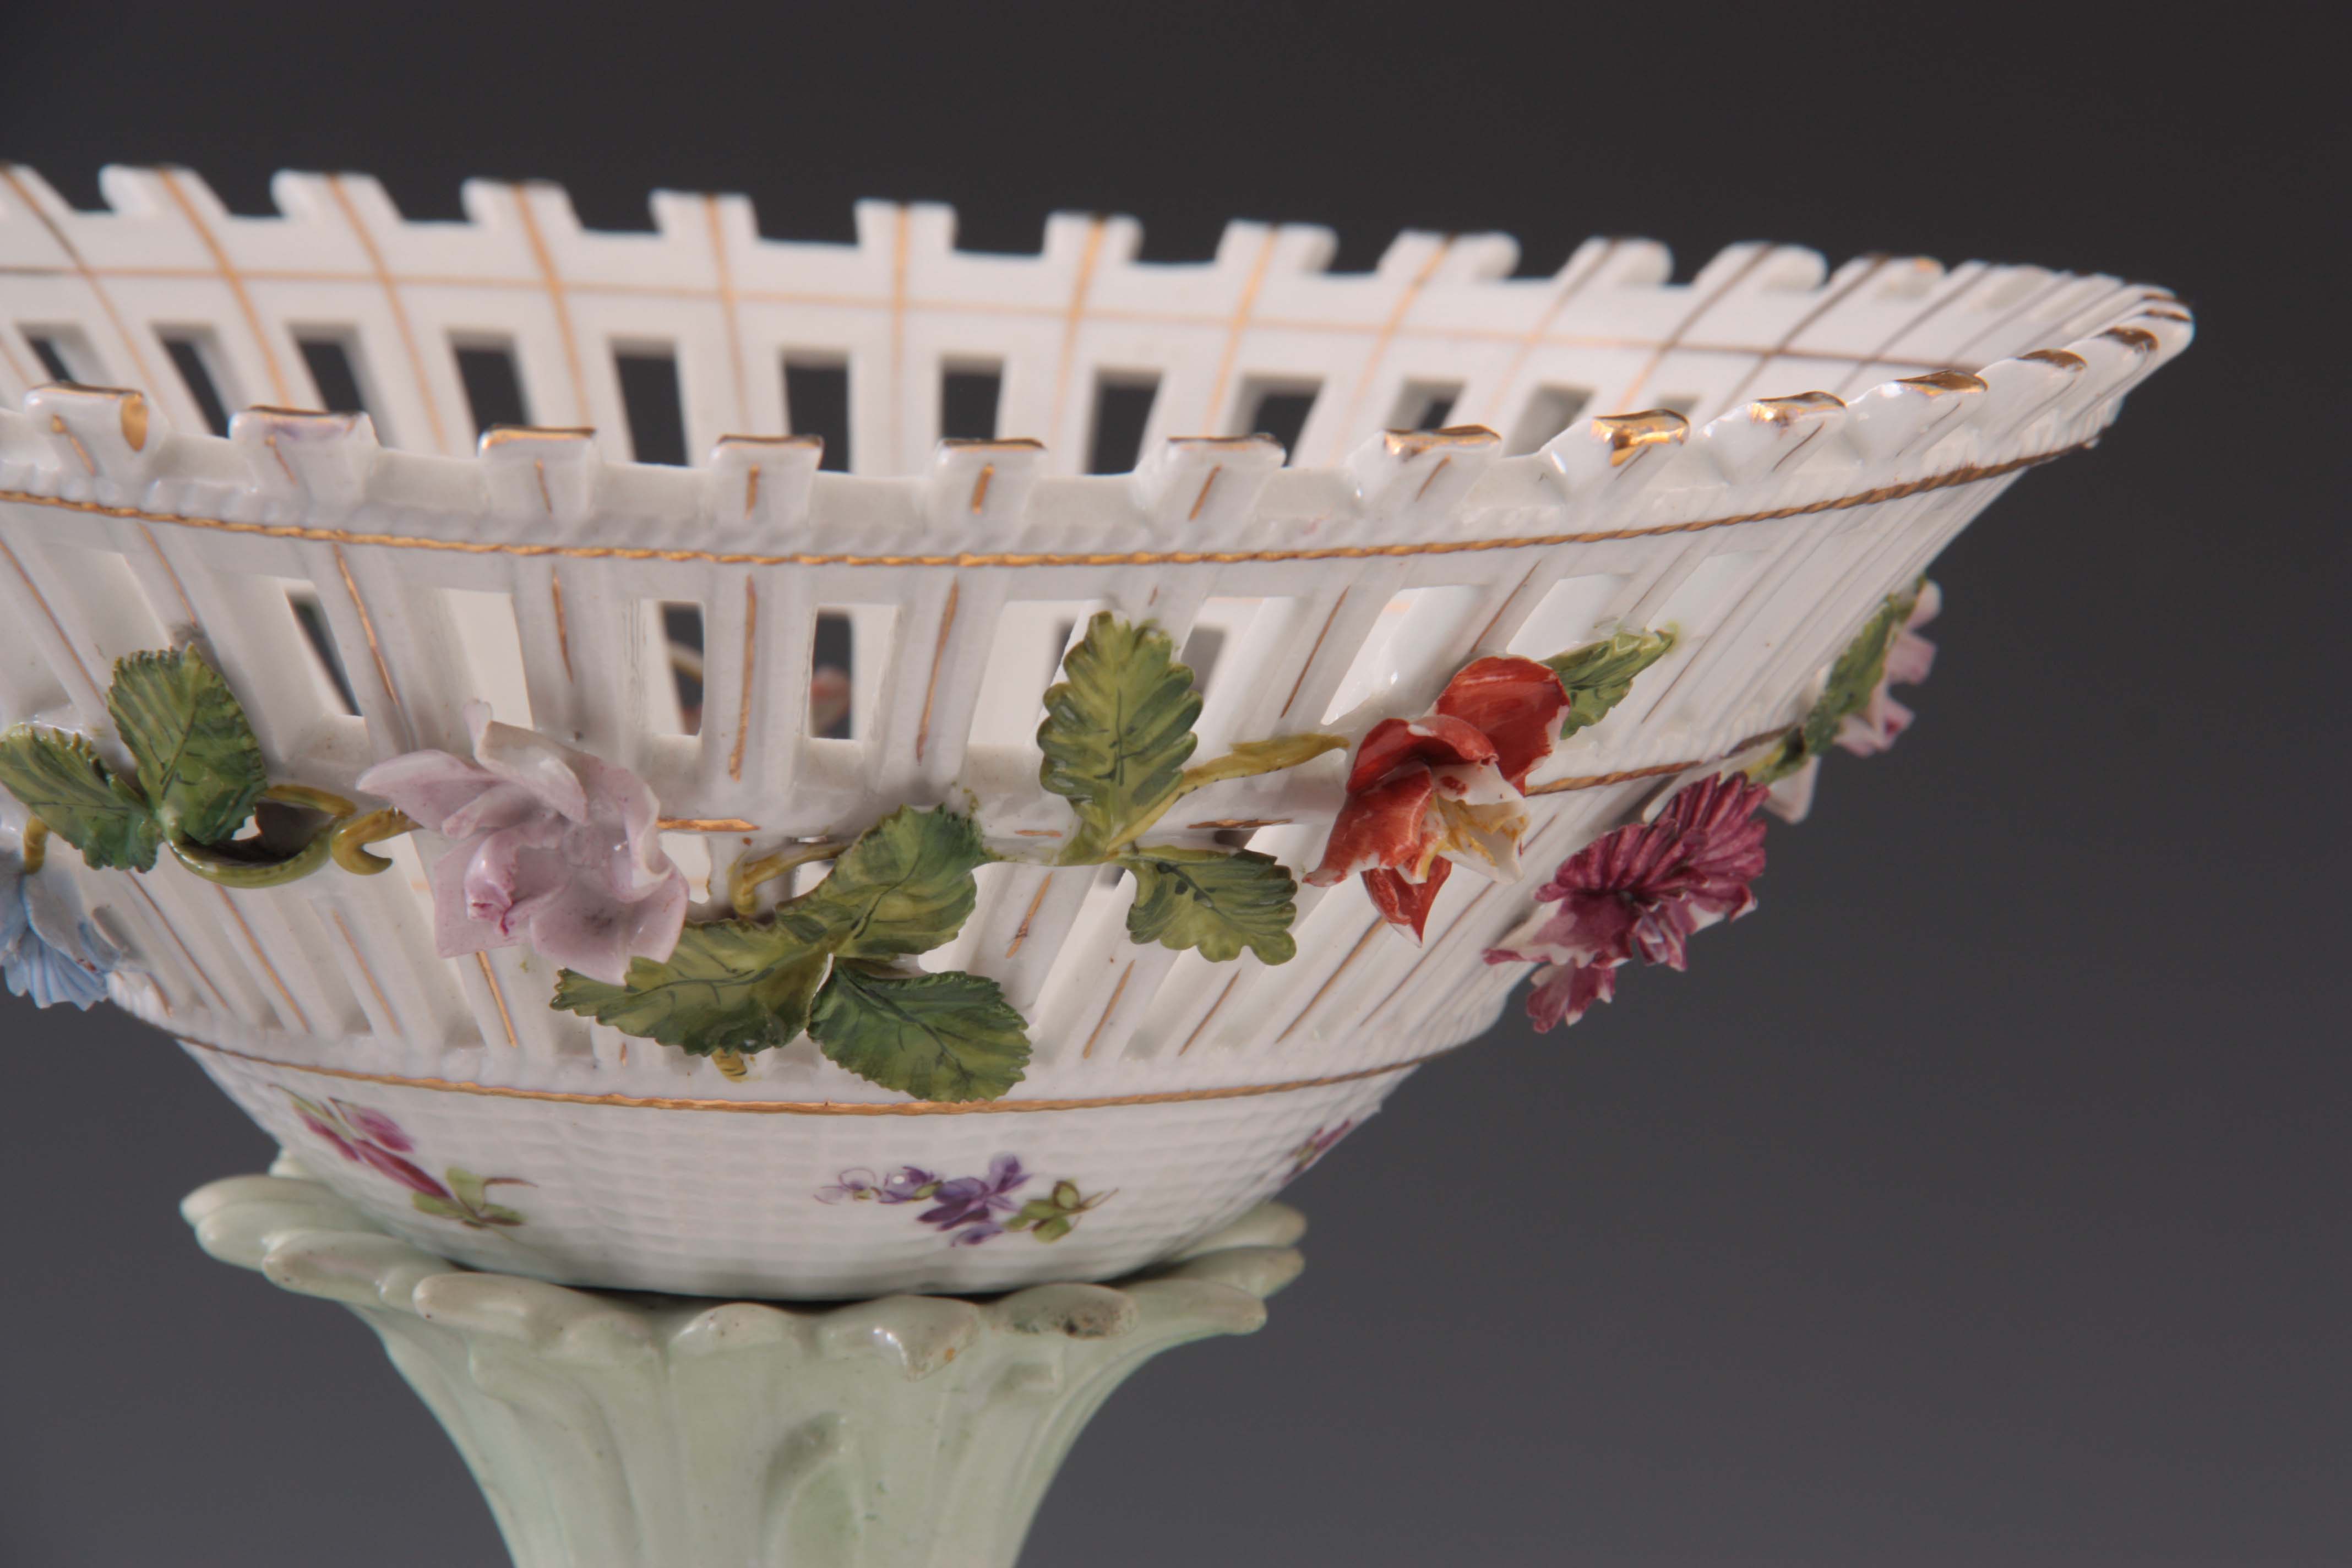 TWO 19TH CENTURY DRESDEN PORCELAIN COMPOTE CENTREPIECES with figural cherub bases and pierced basket - Image 6 of 9